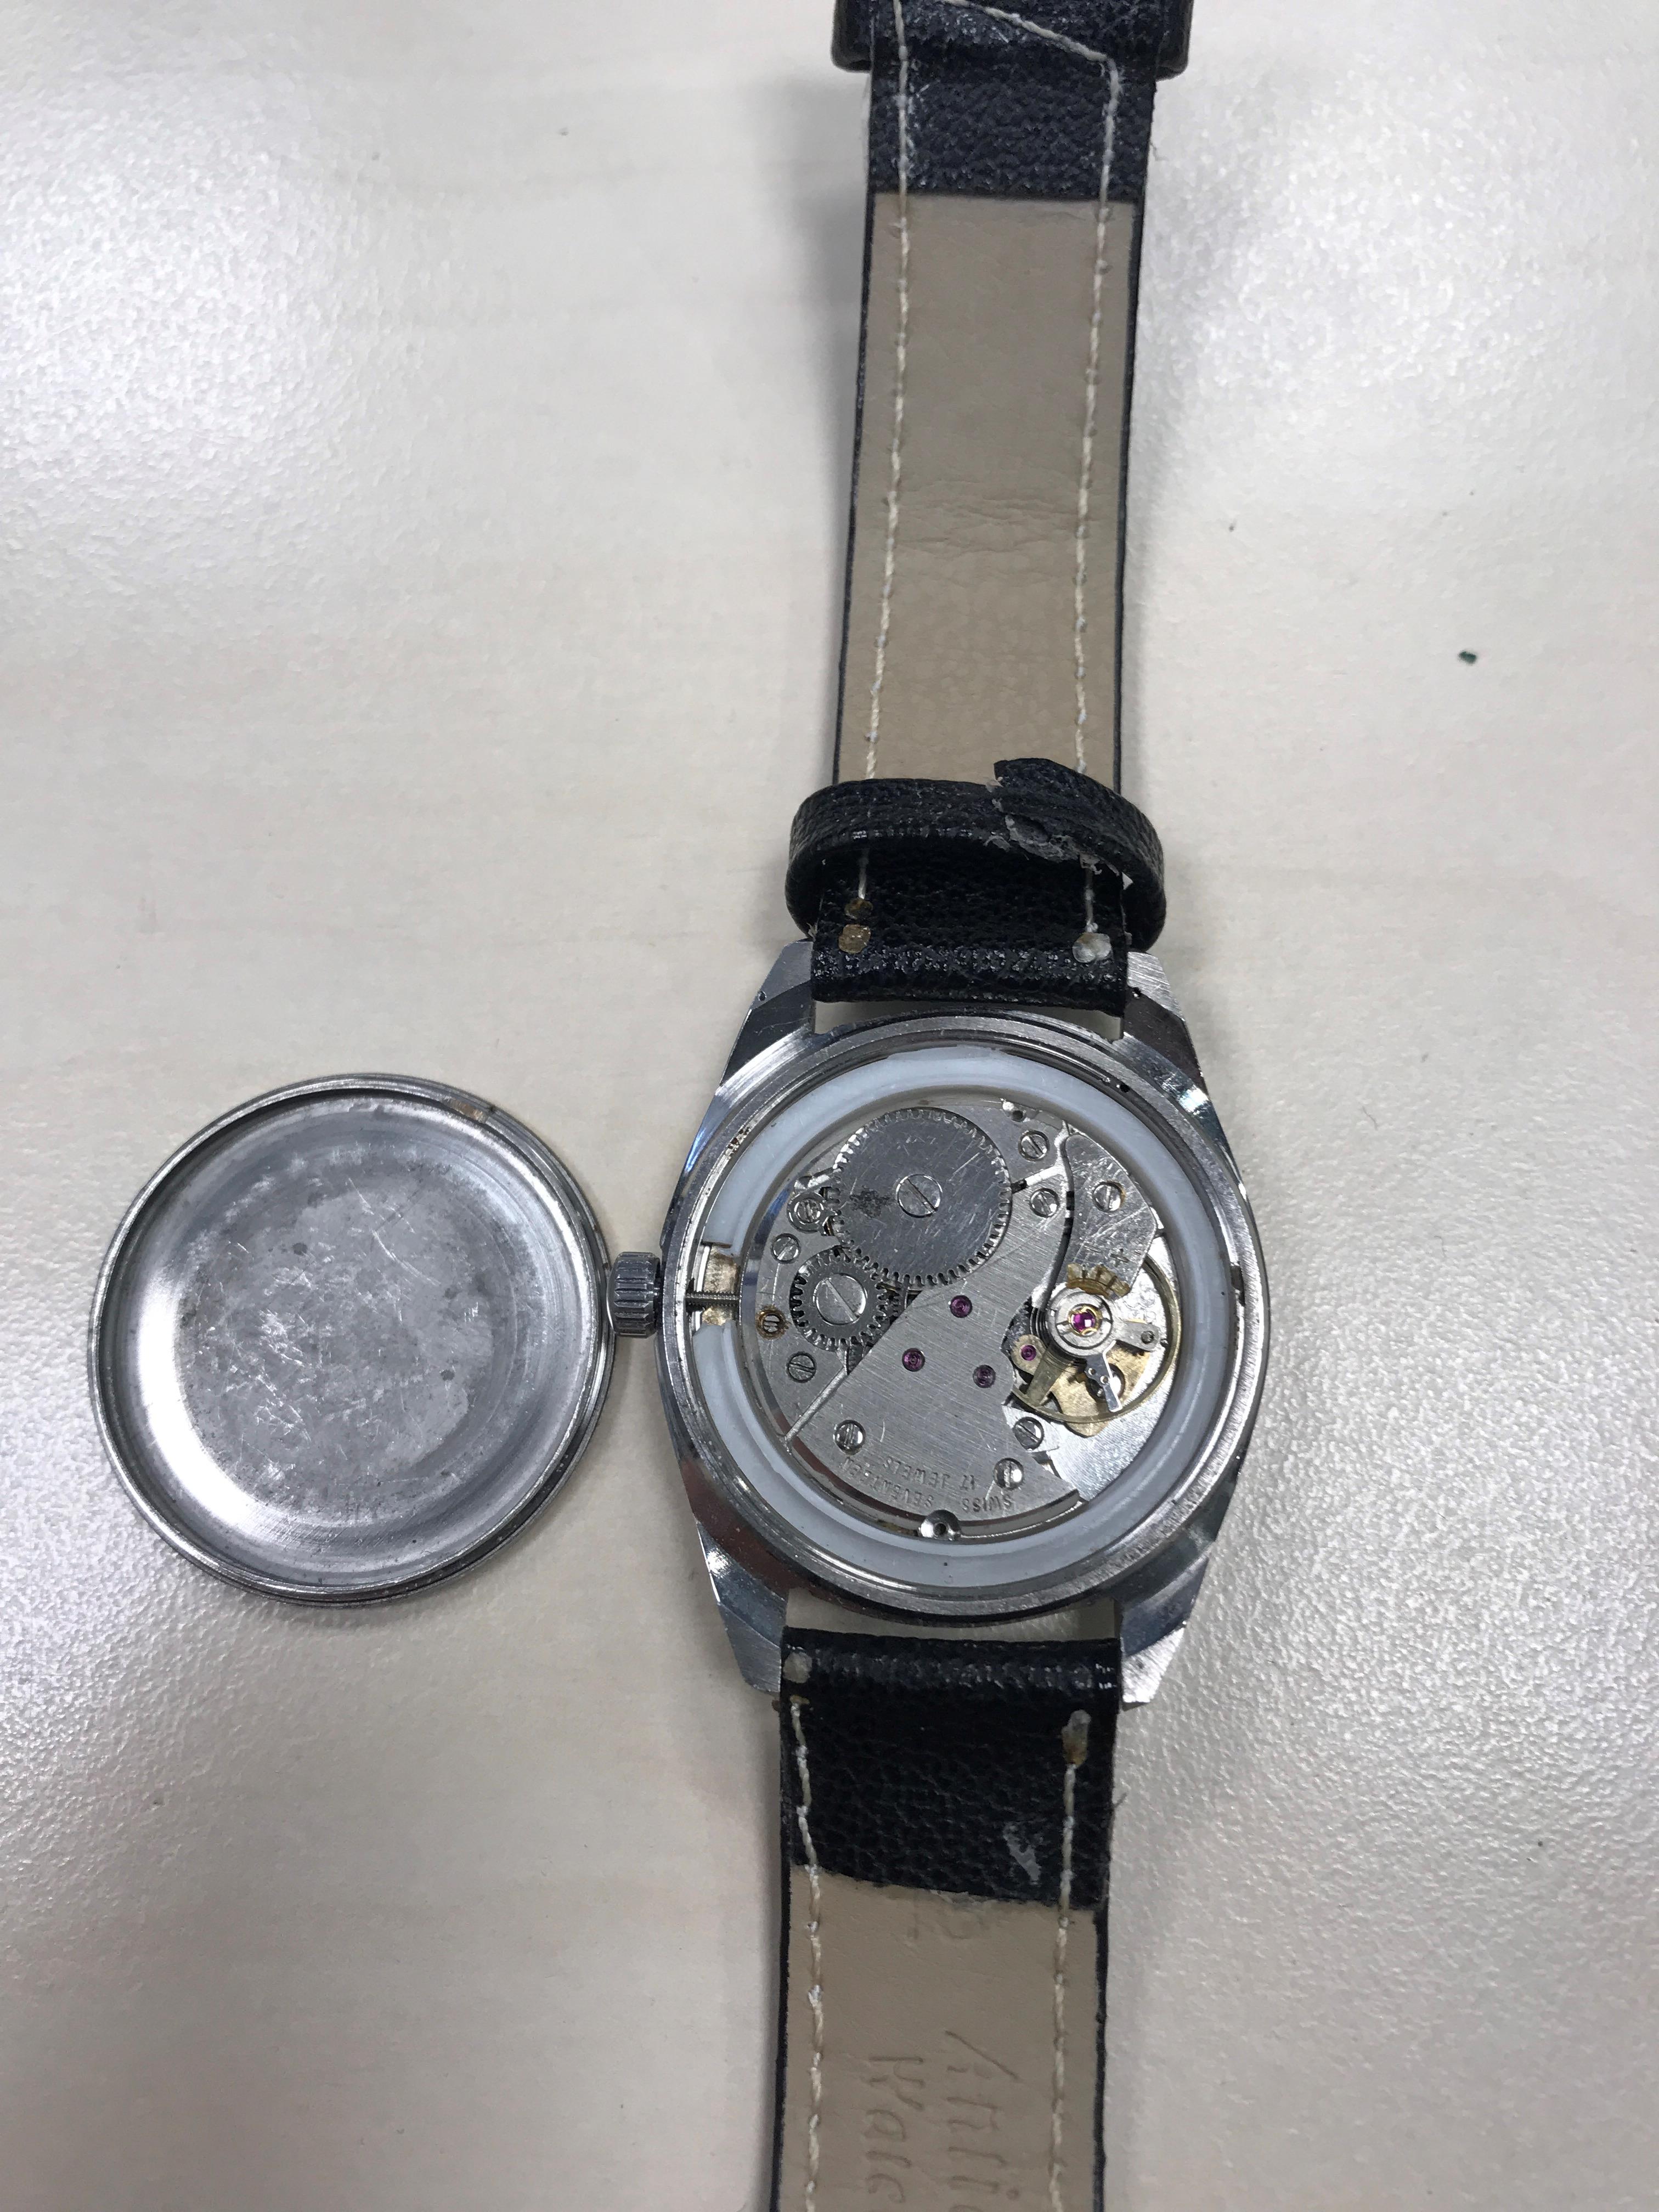 TWO GENTLEMAN'S WRIST WATCHES - Image 2 of 2